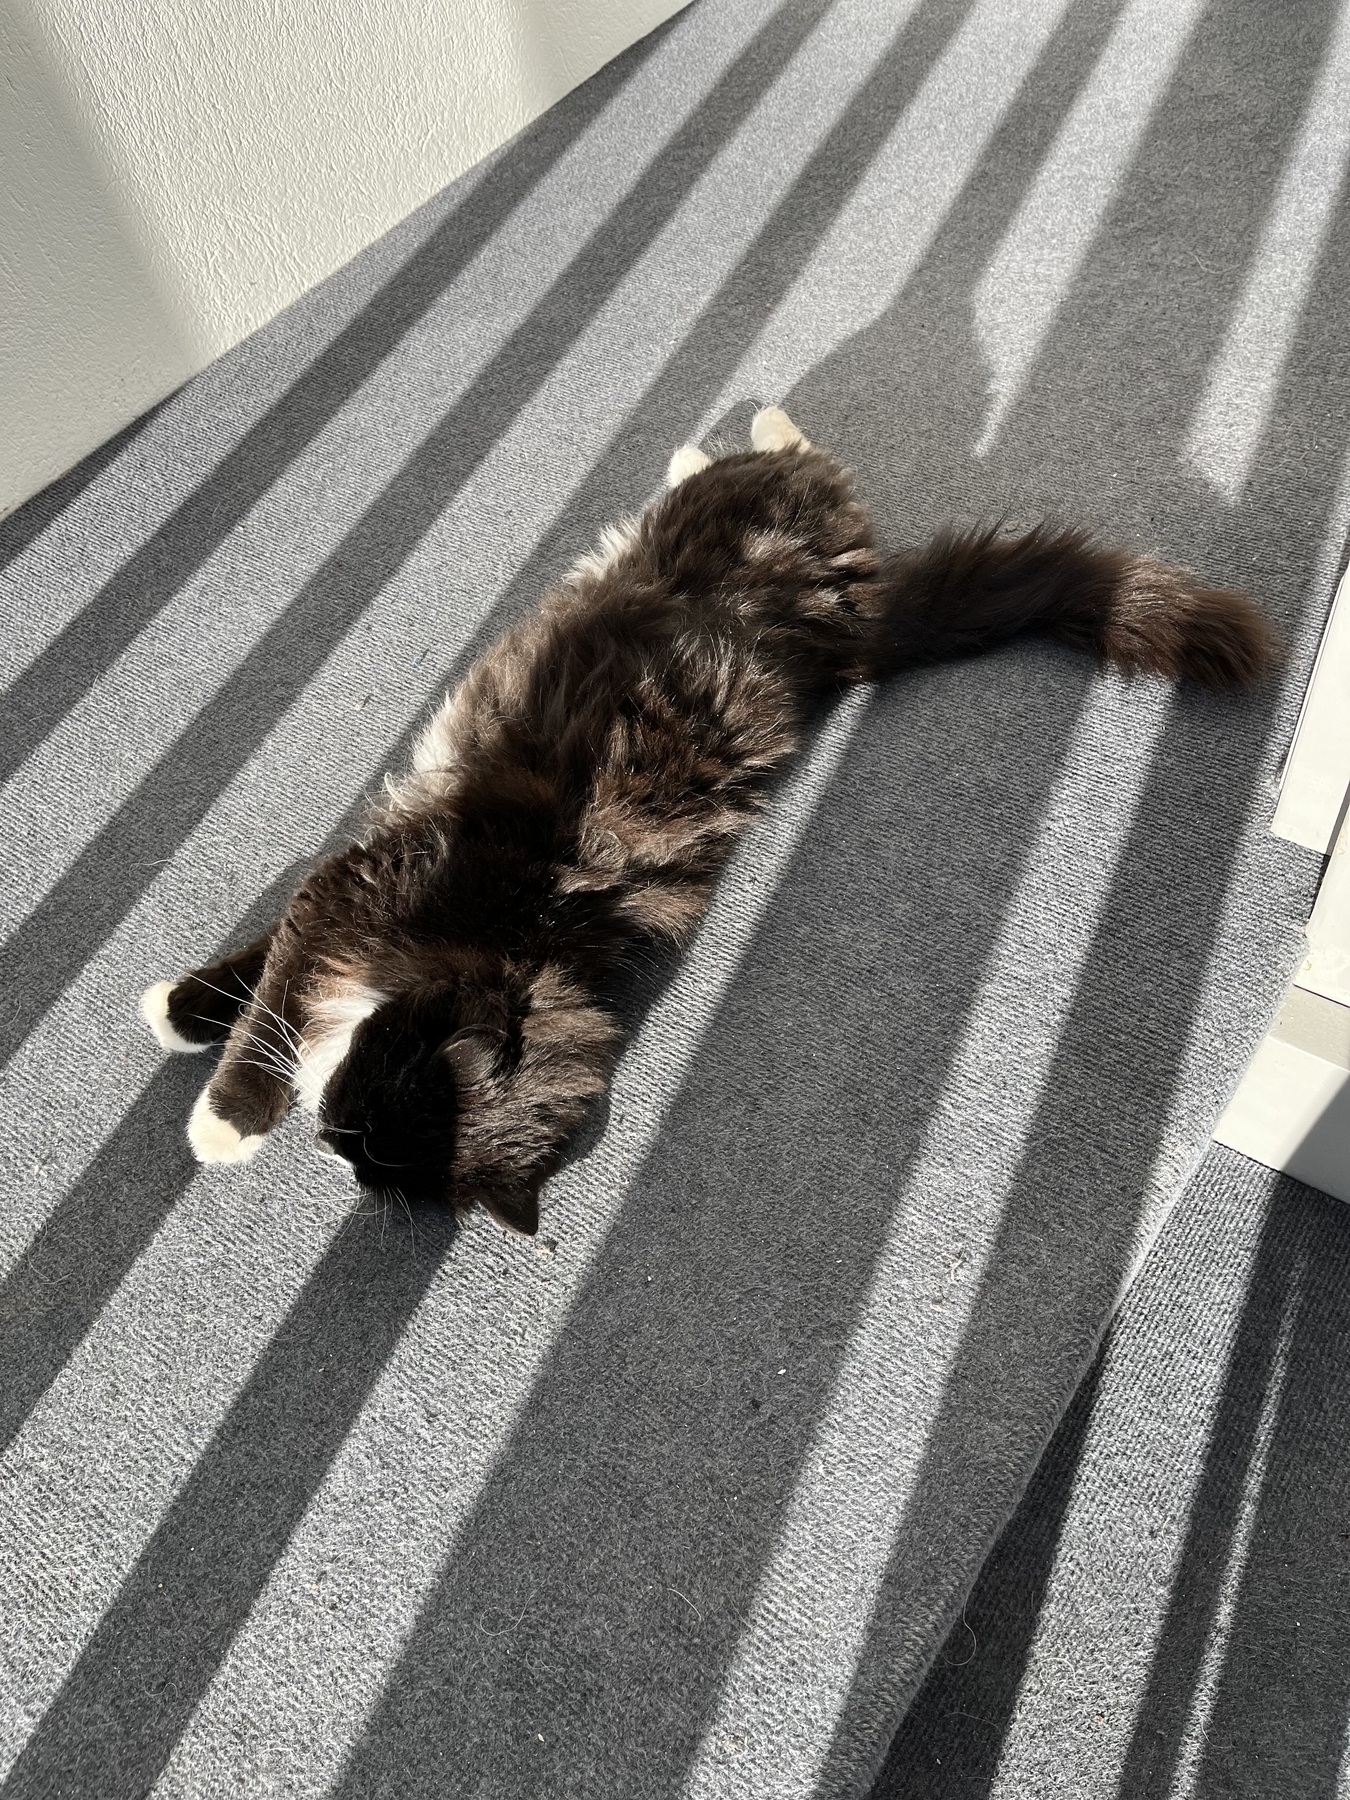 A small black and white long-haired cat has a big stretch on a carpet